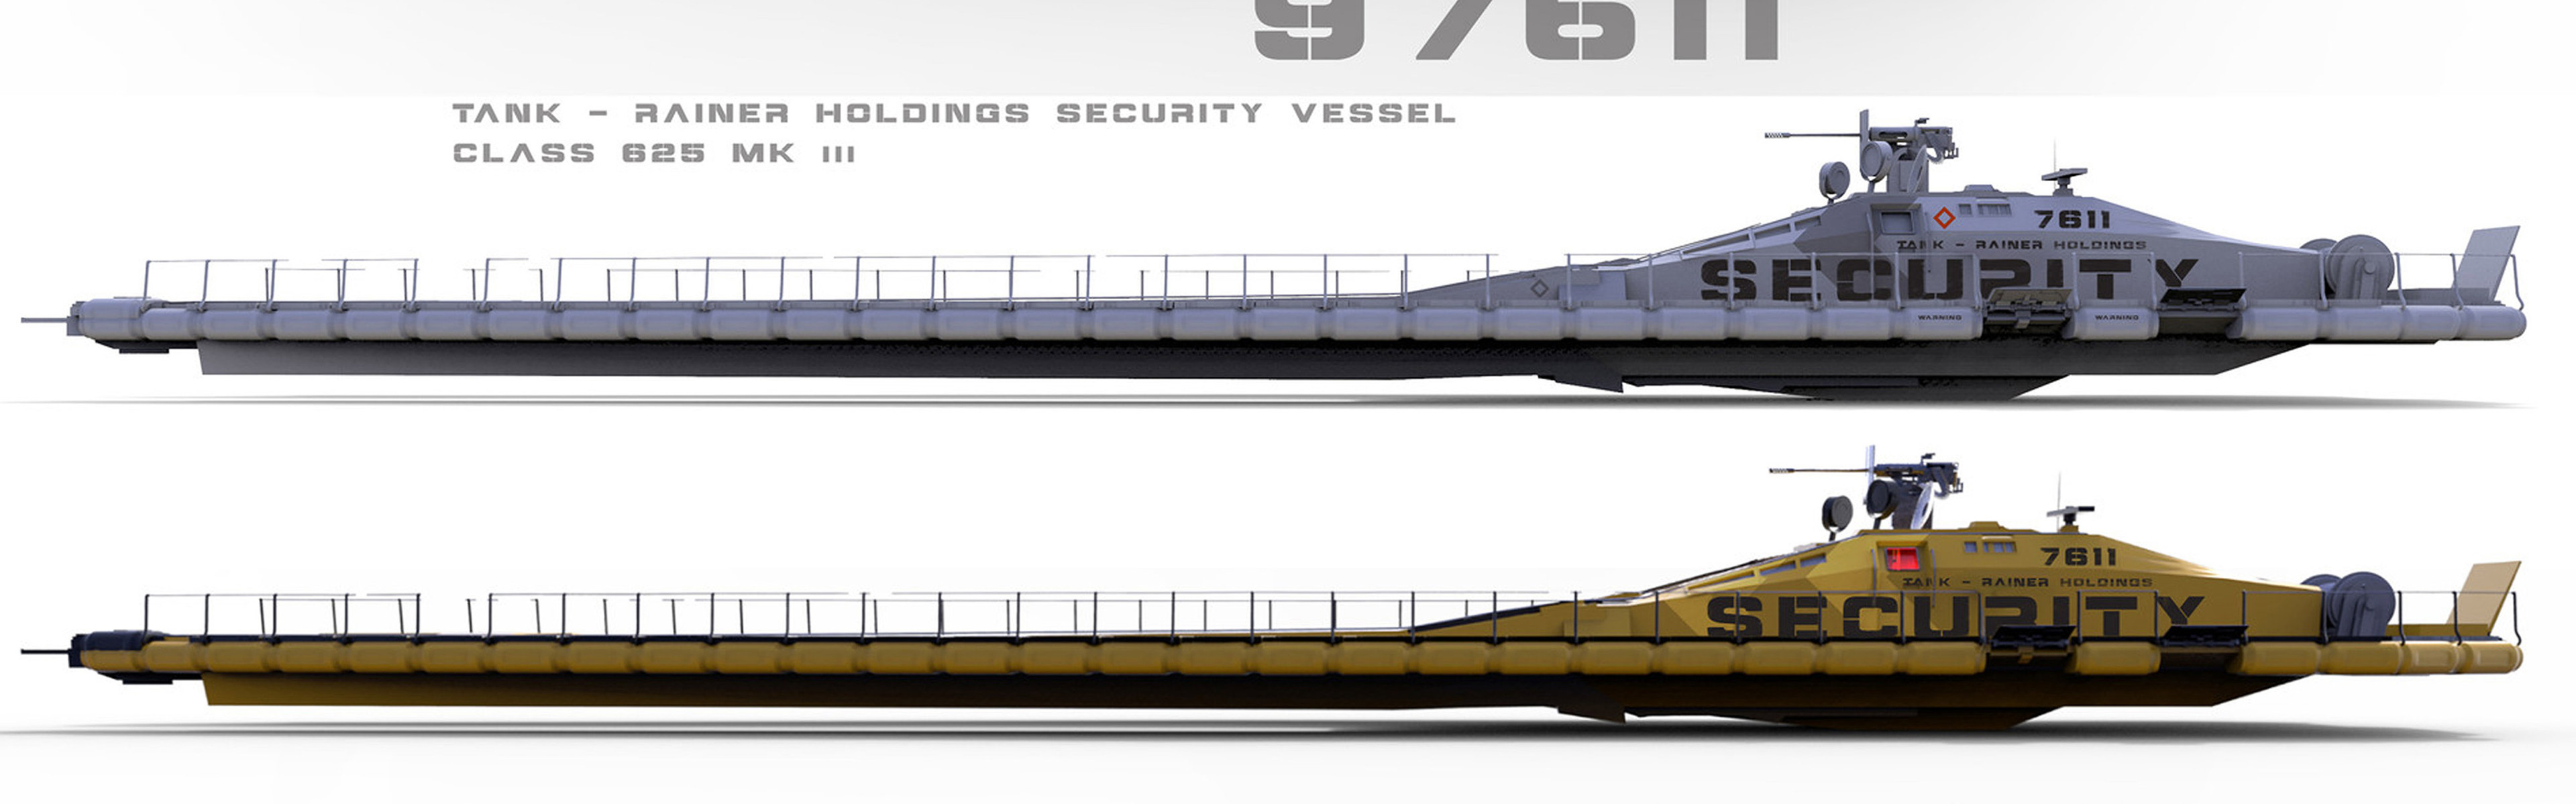 Designs for the look of the ships exploring graphics / typography and colour